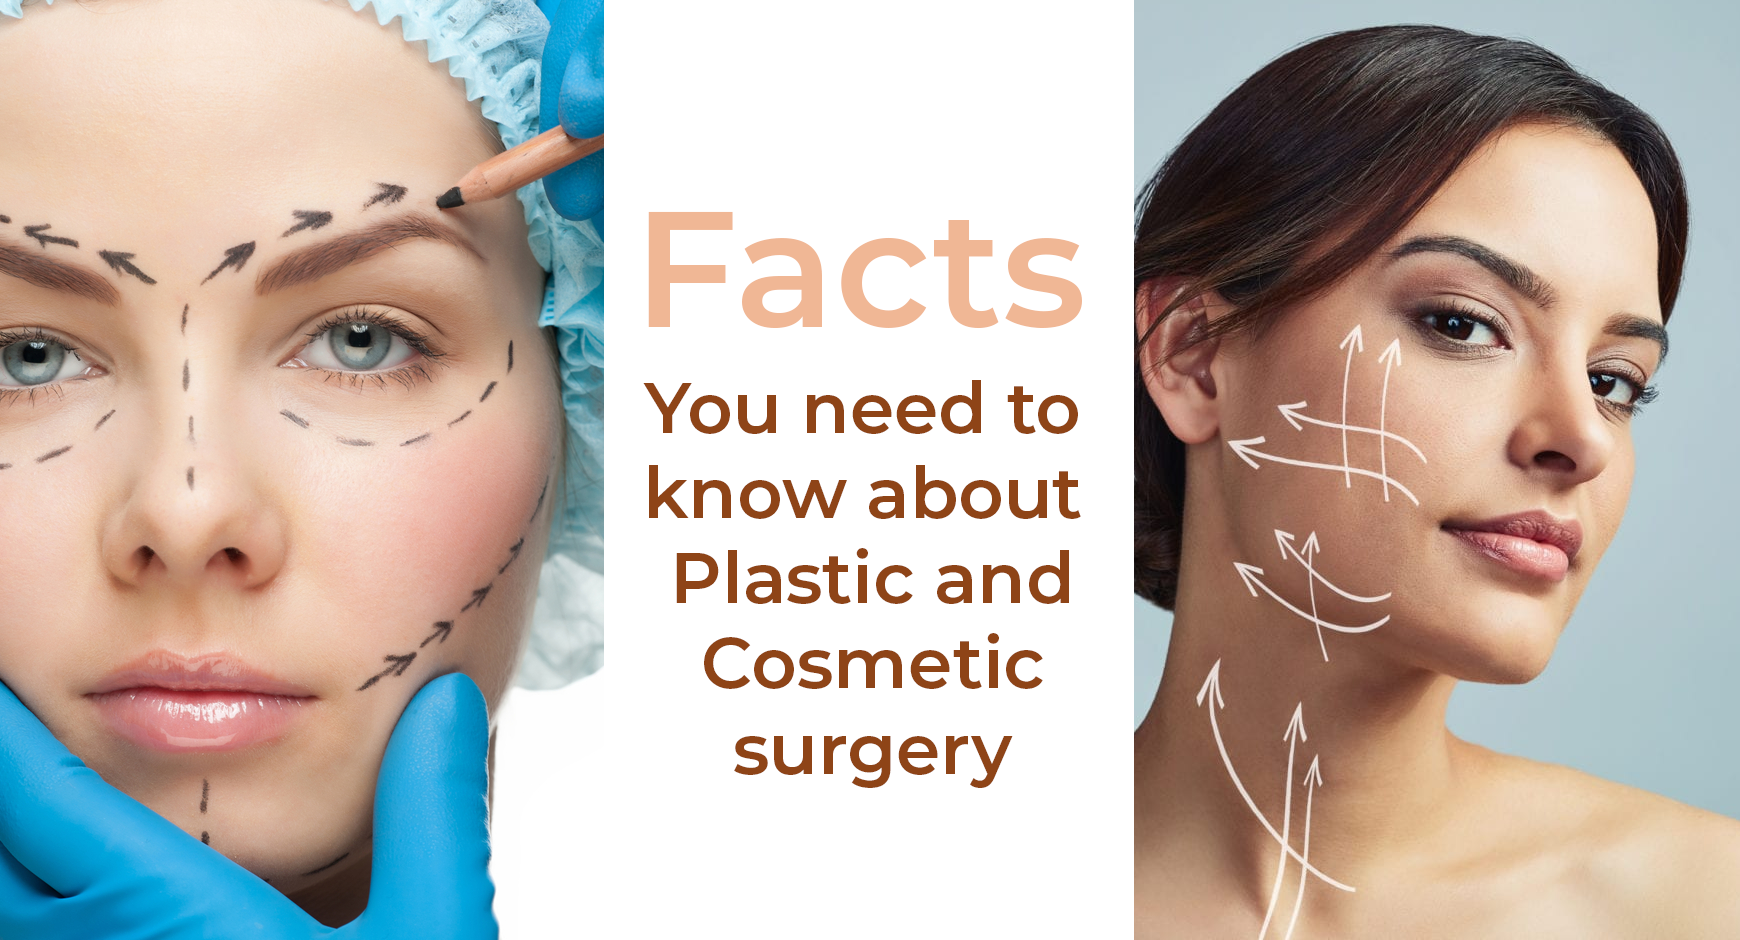 Facts you need to know about Plastic and Cosmetic surgery